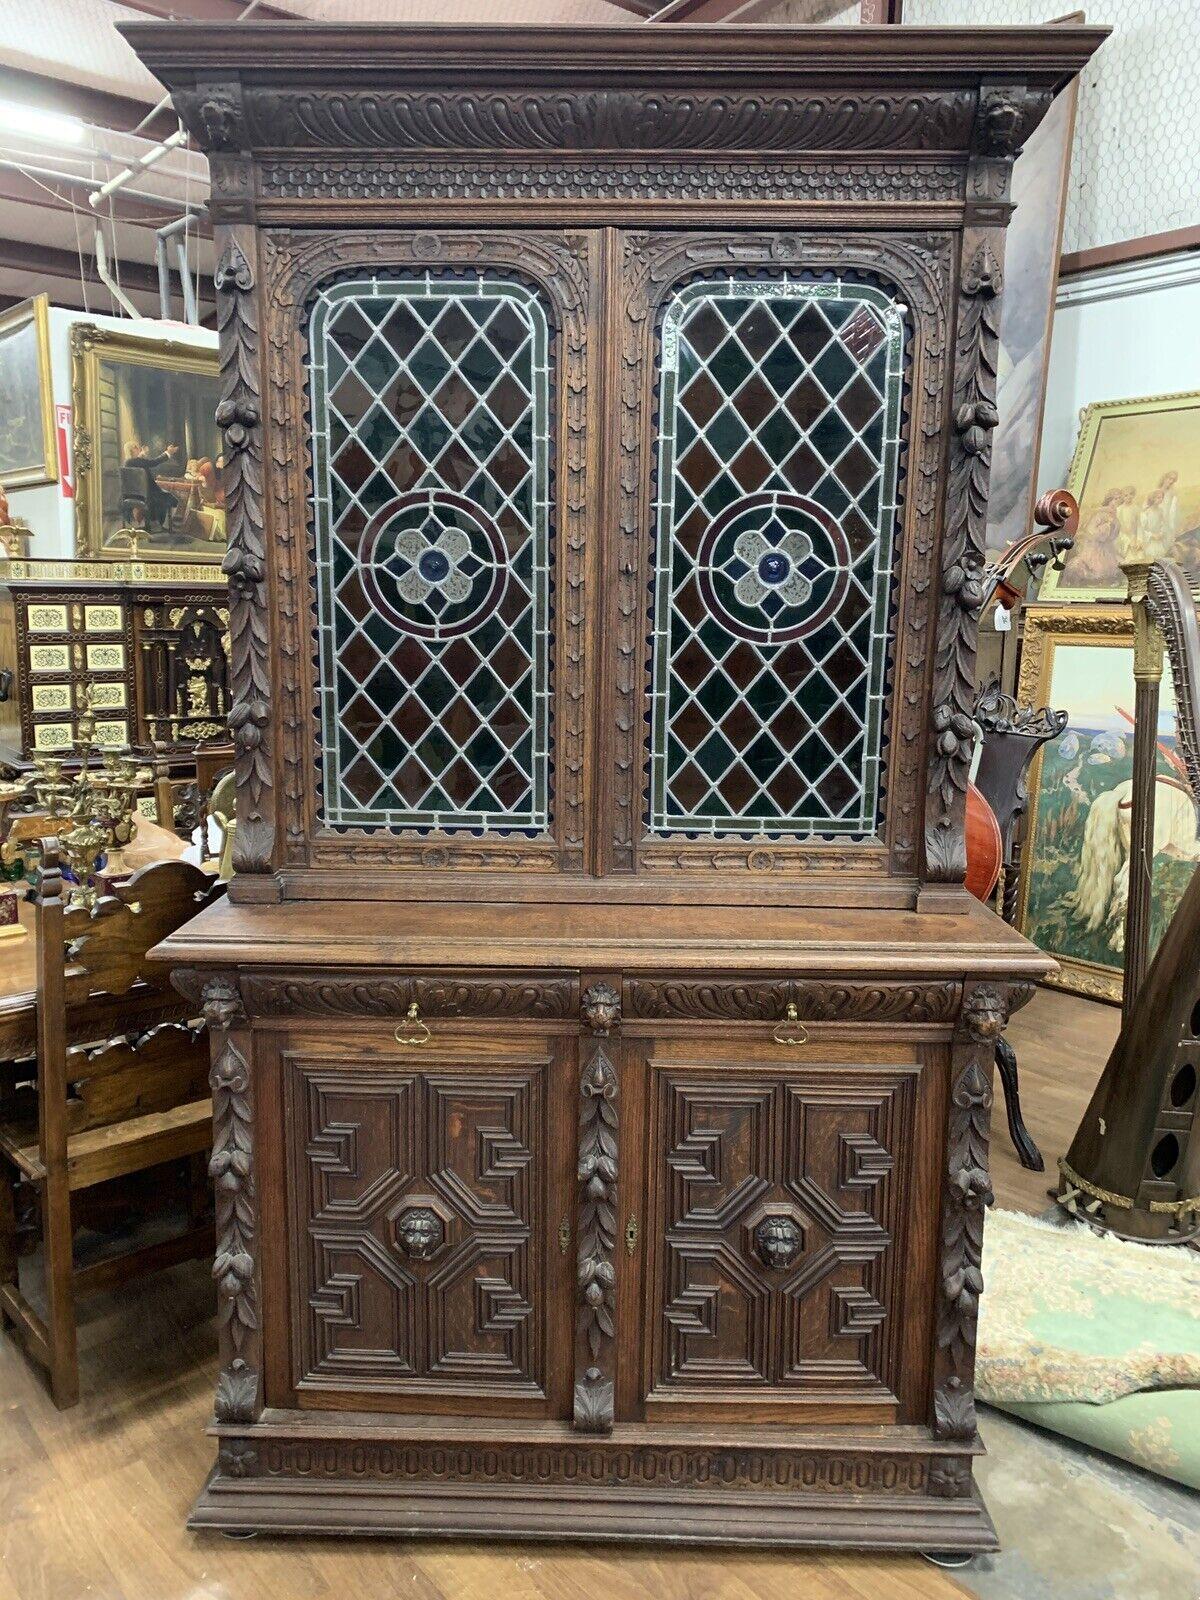 Gorgeous antique sideboard, Buffet Server, Dutch stained glass sideboard, Foliage, 1800s! Dutch stained glass sideboard, 19th century, 1800', with key included!! 

Gorgeous 19th century continental buffet /server with stained glass doors, foliage